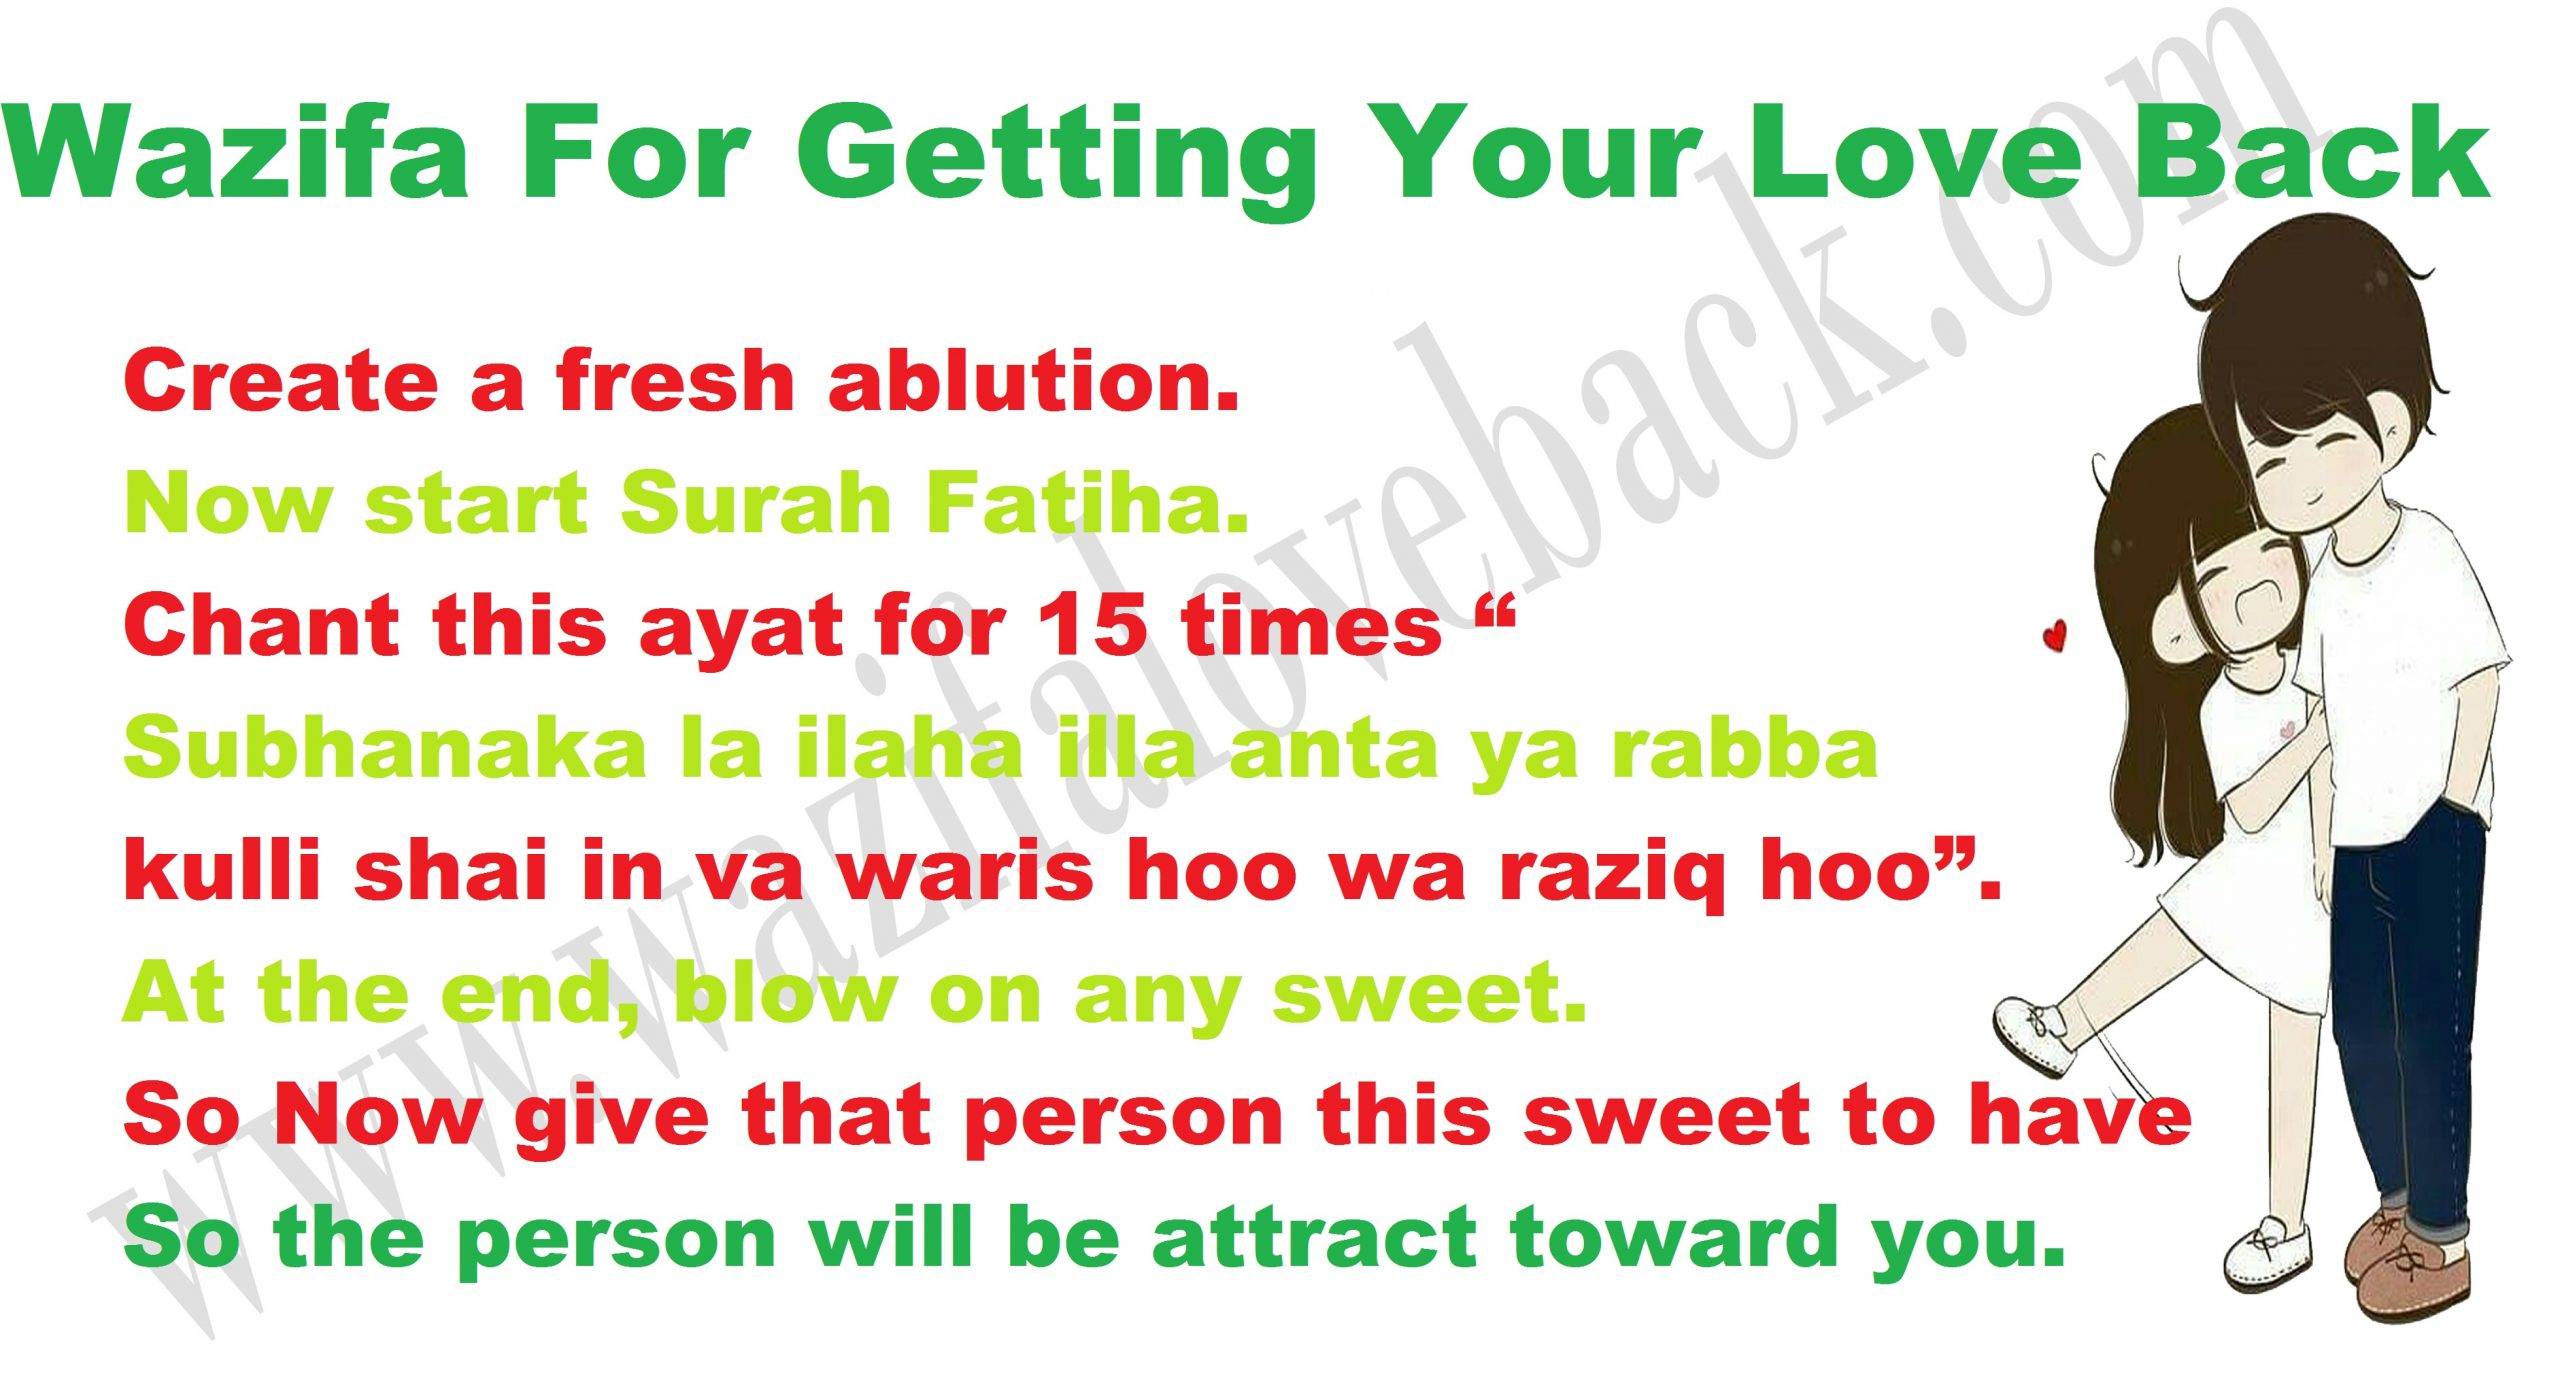 Wazifa For Getting Your Love Back